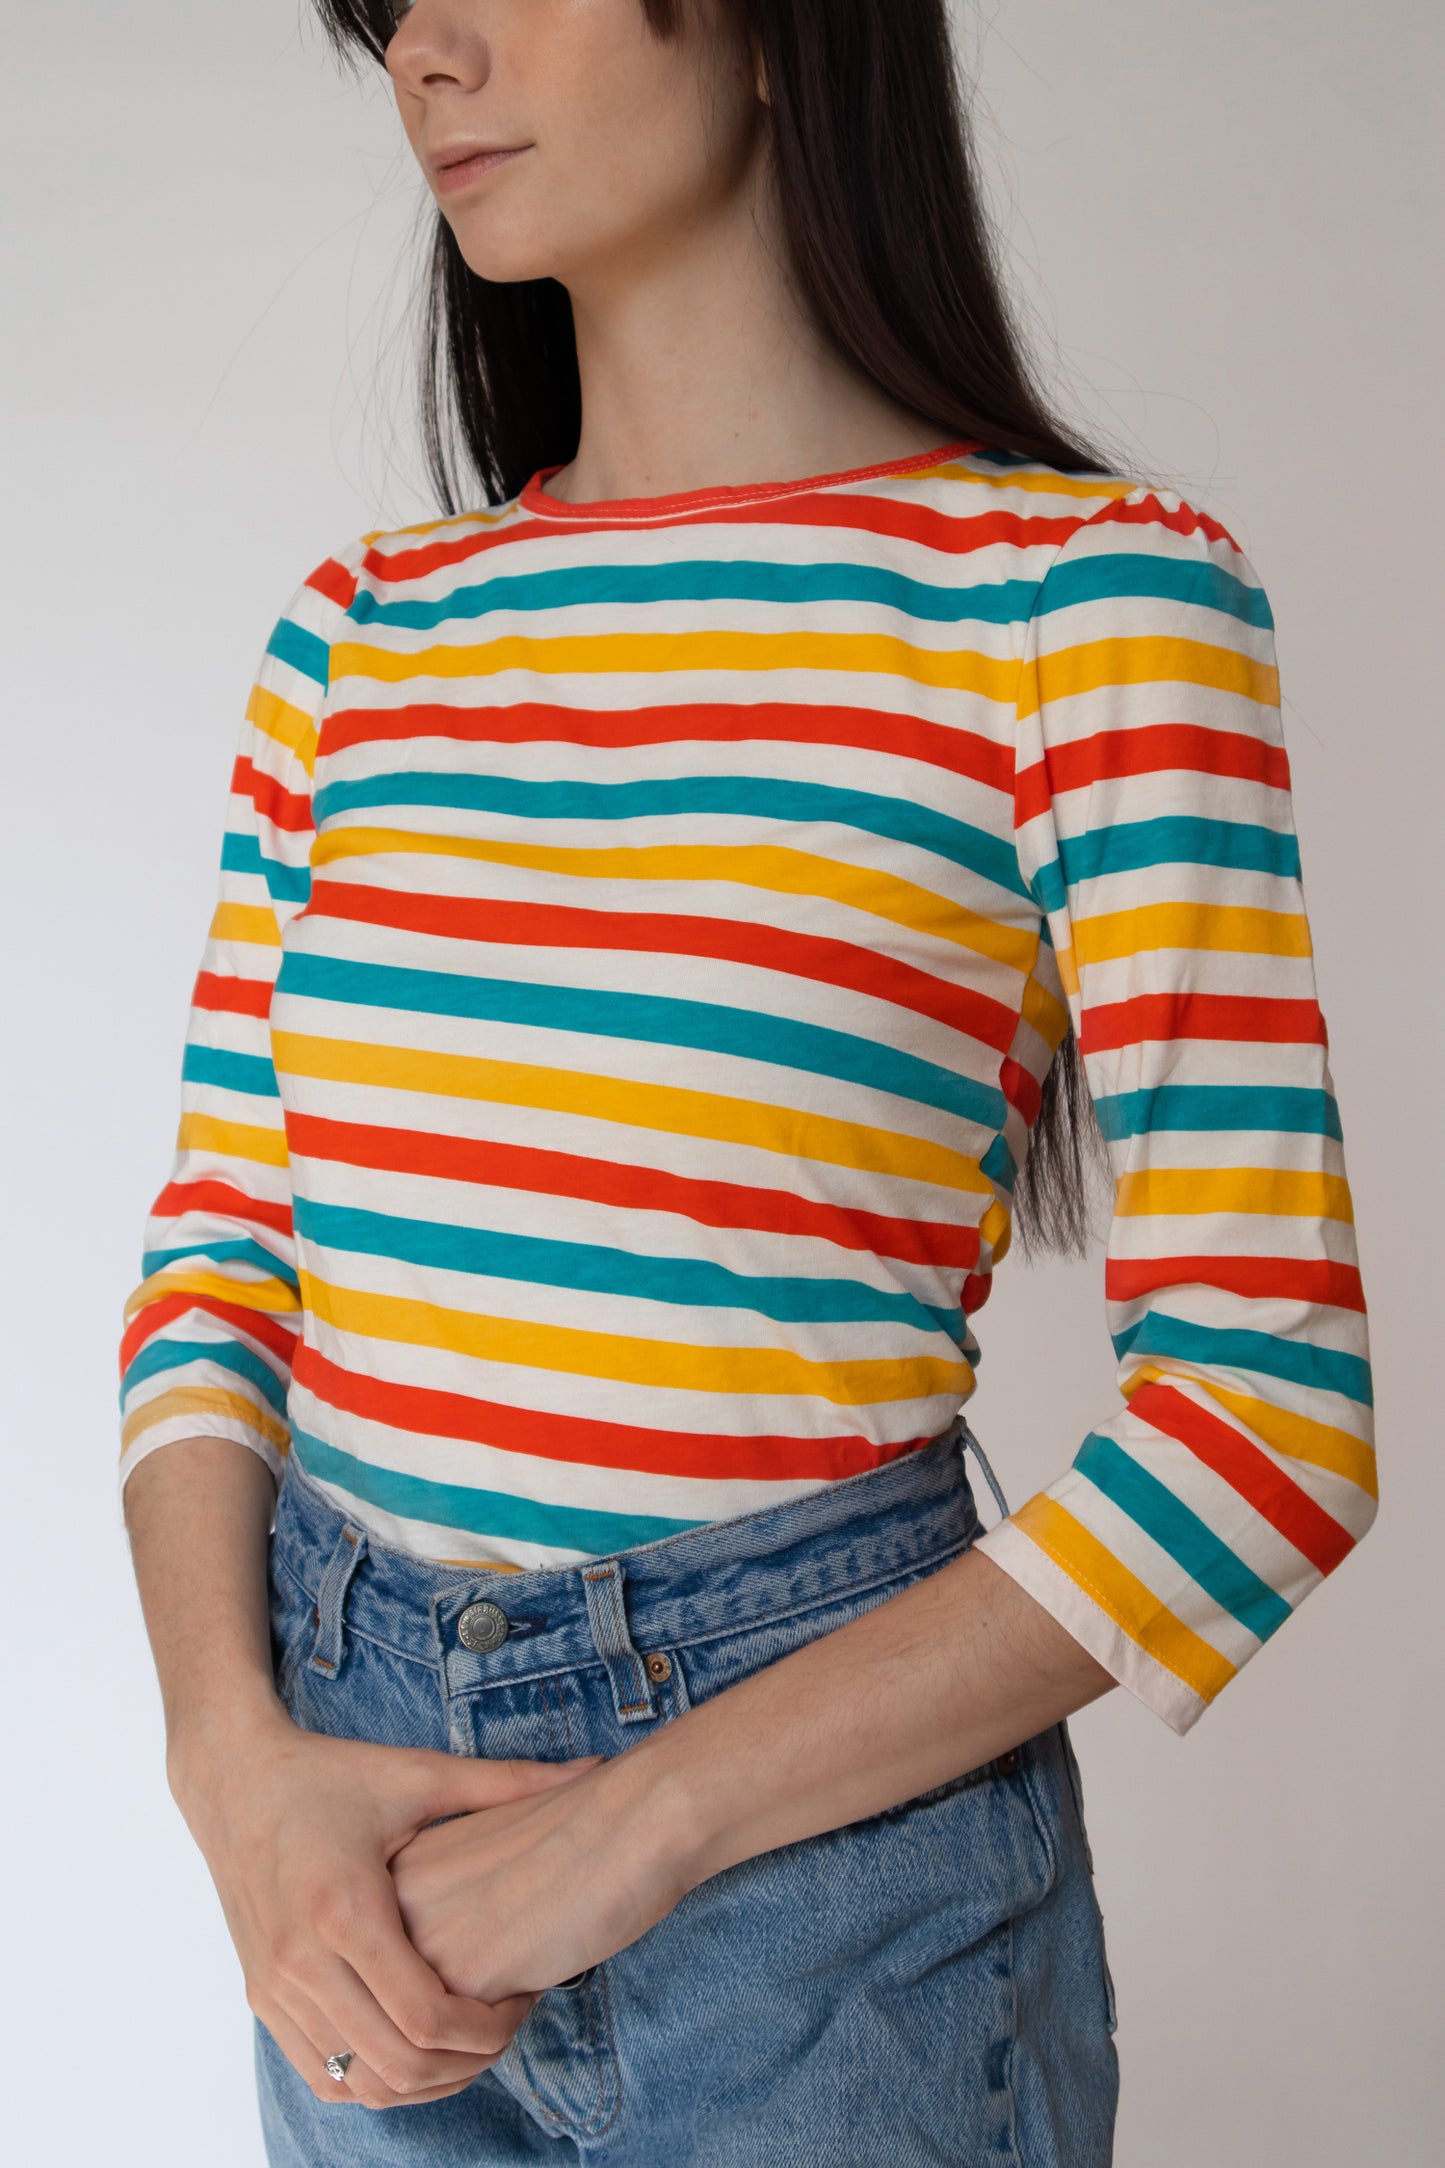 Closeup of bright orange, yellow and blue 3/4 sleeved striped shirt with jeans